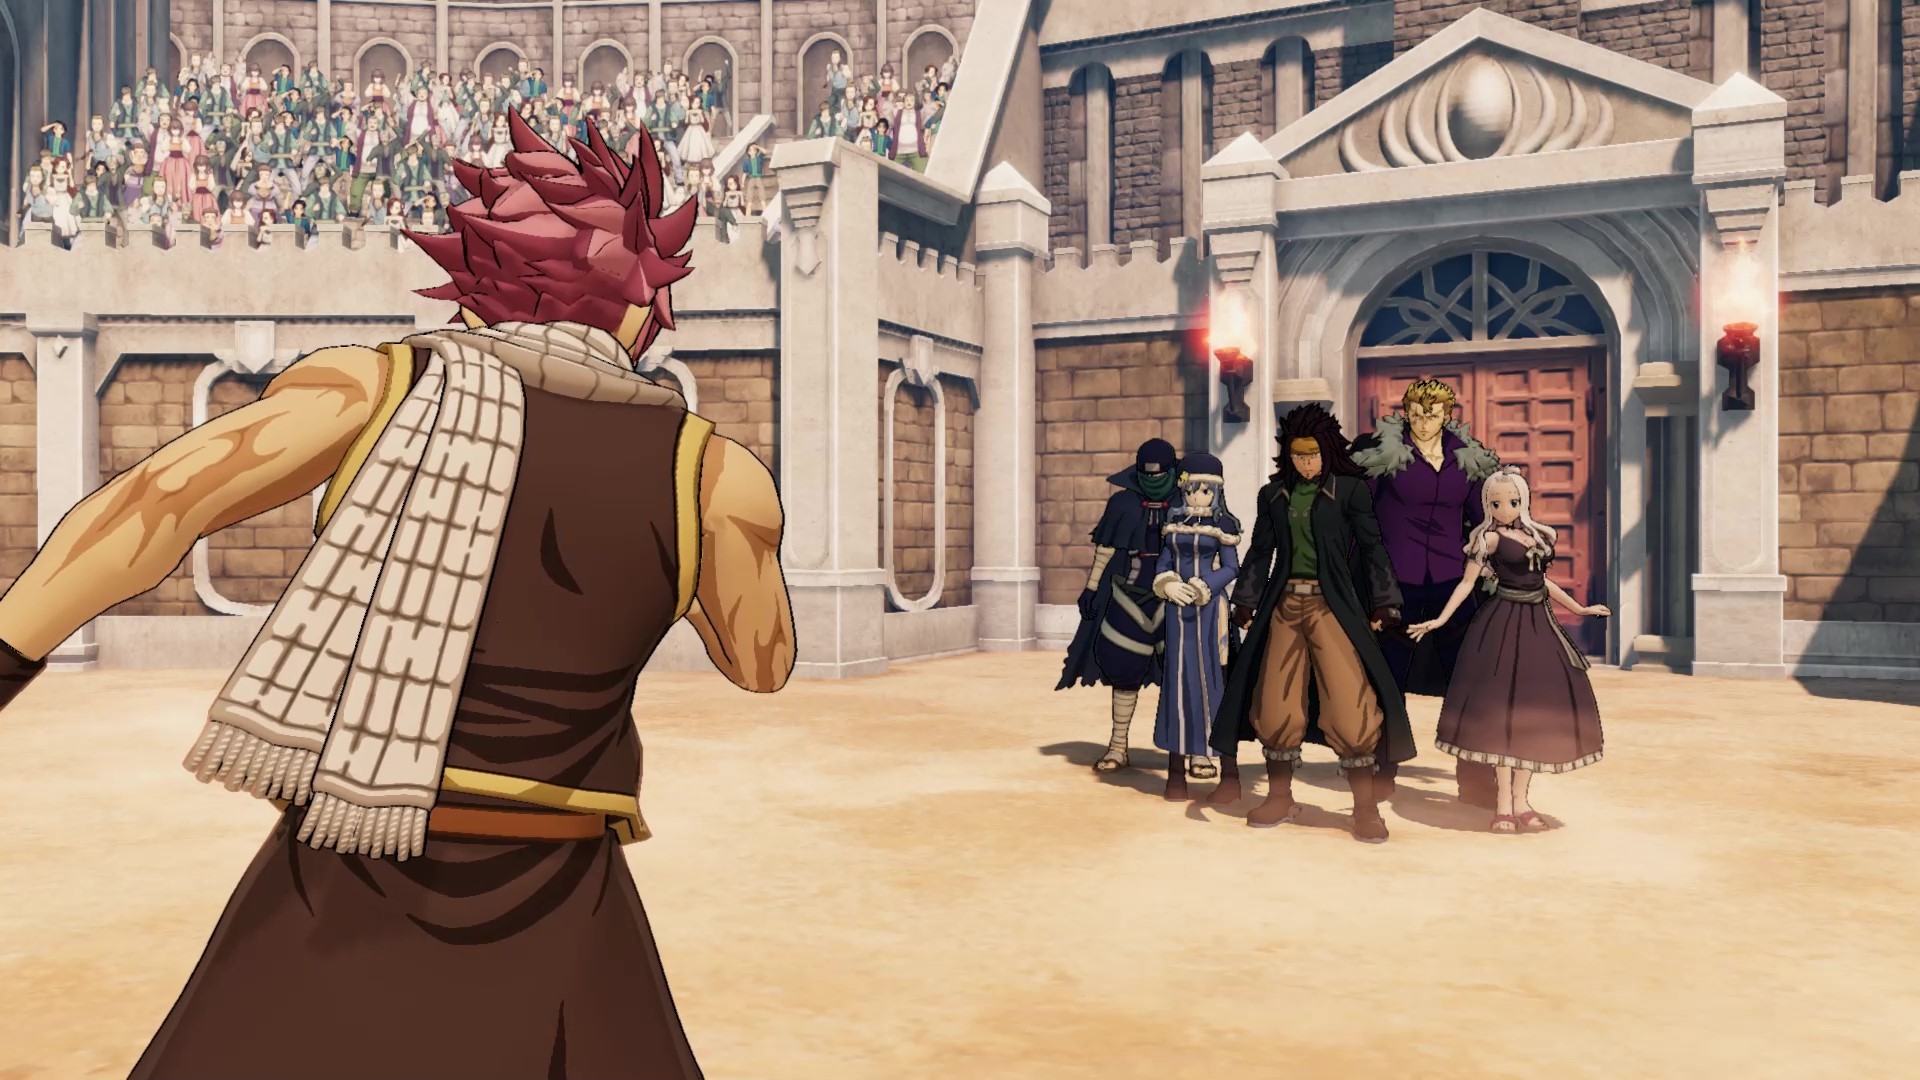 FAIRY TAIL 40, Video software